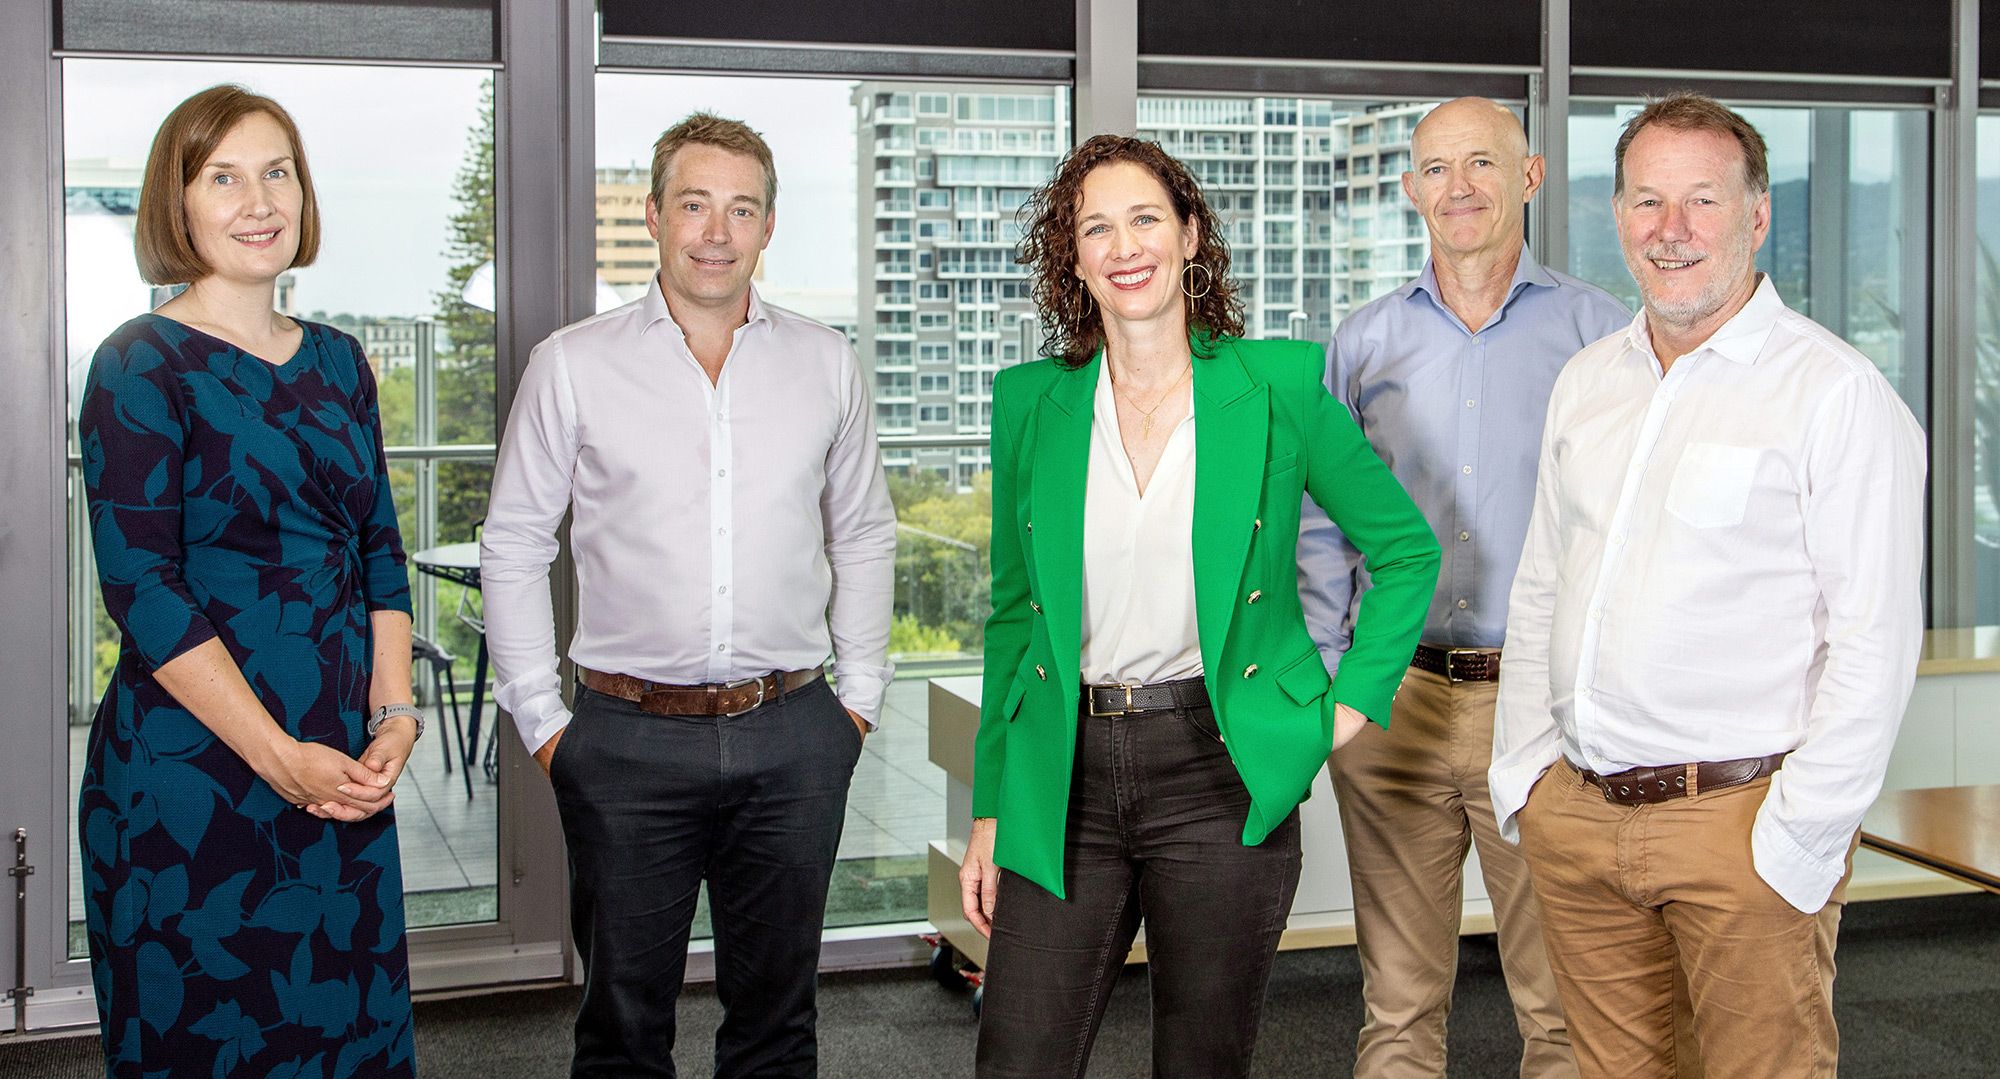 Image contains from left to right: Rowan Roberts KPMG MC Partner & SA Geographic Lead, Stephen Silver Think180 Co-founder & Business Development Director, Pauline Doherty KPMG Partner & National SAP Practice Leader, Peter Butler Think180 Co-founder & Finance Director, and John Schultz Think180 Co-founder Director & CEO